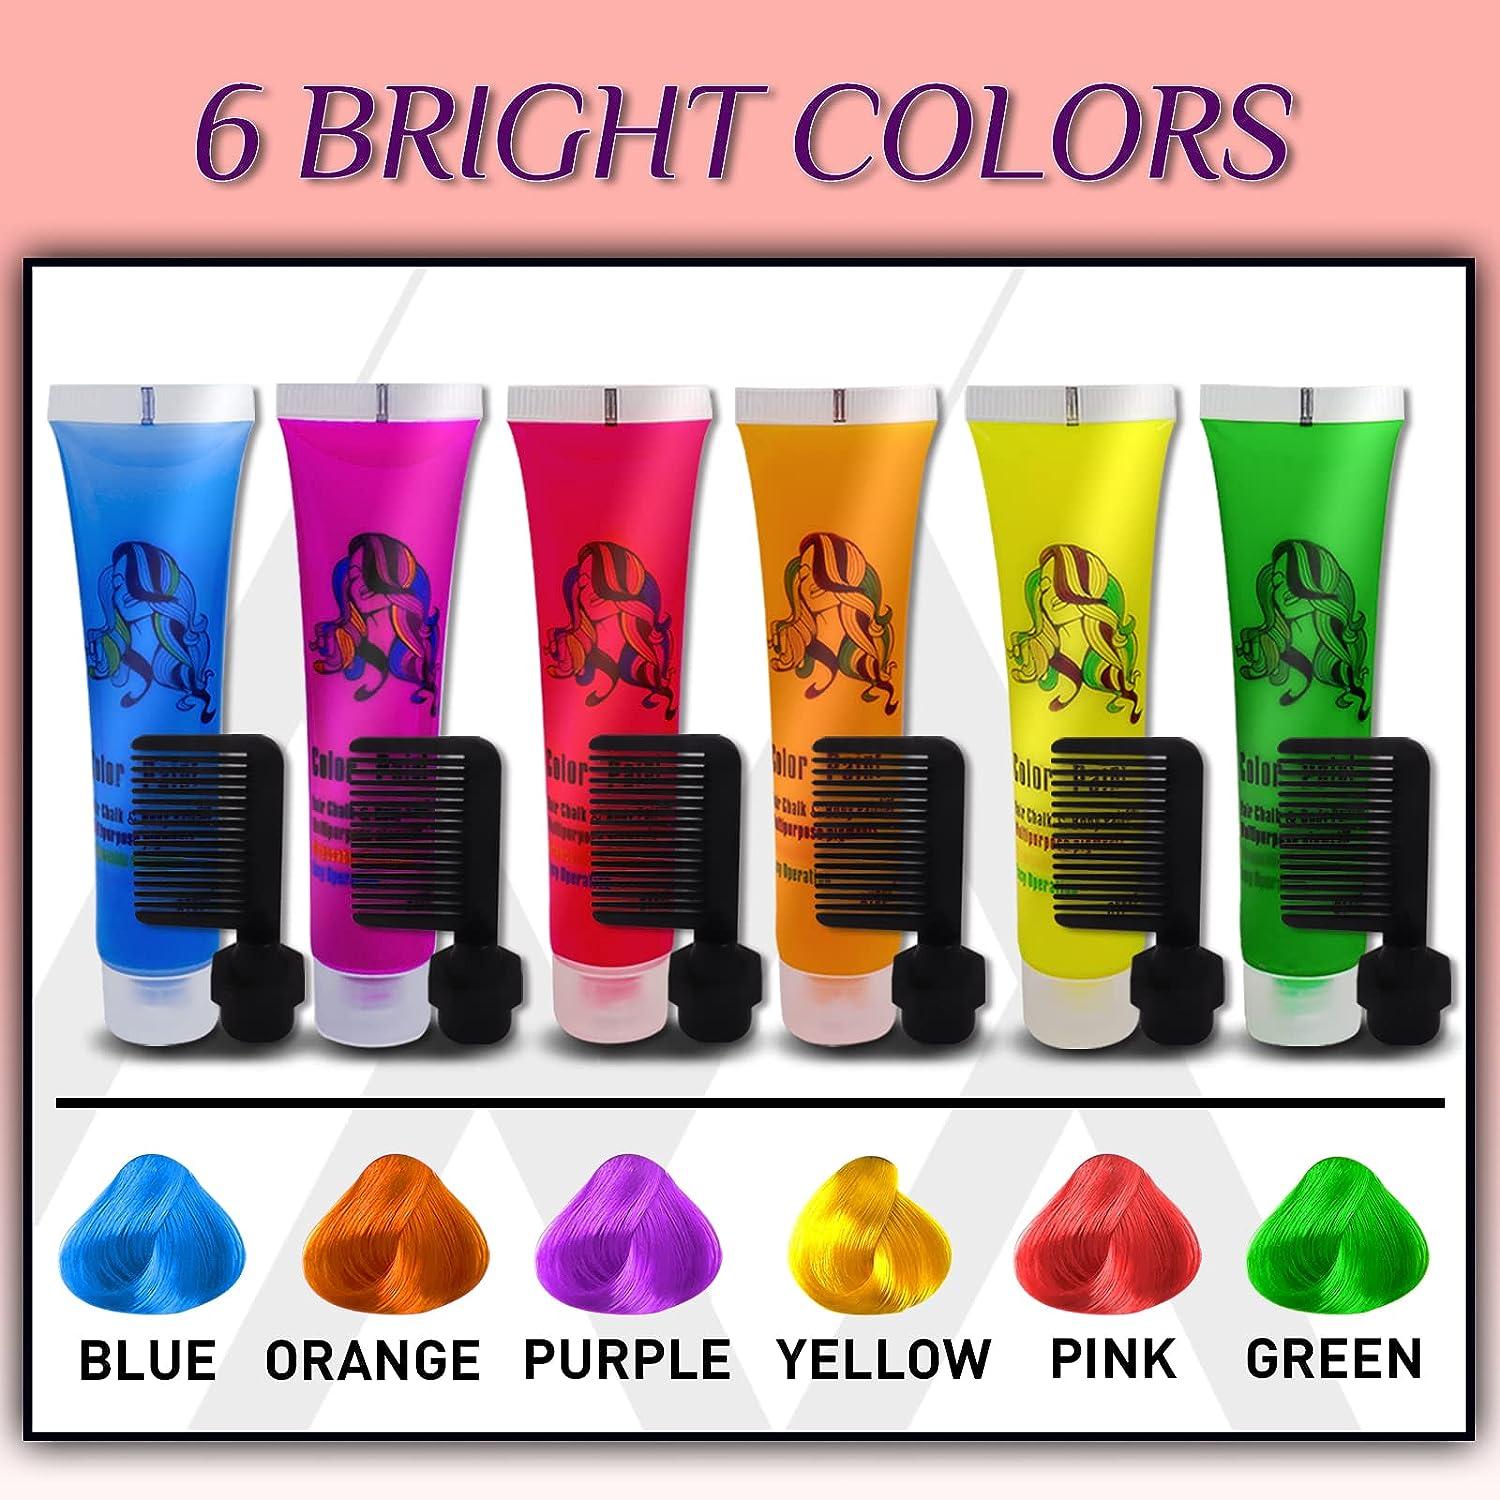  Temporary Hair Dye, Hair Dye Glow in the Dark Paint Can Dye  More 55% Hair Than Hair Chalk on Christmas, Birthday and Music Festival  Party Supplies, Gifts for Girls and Boys 